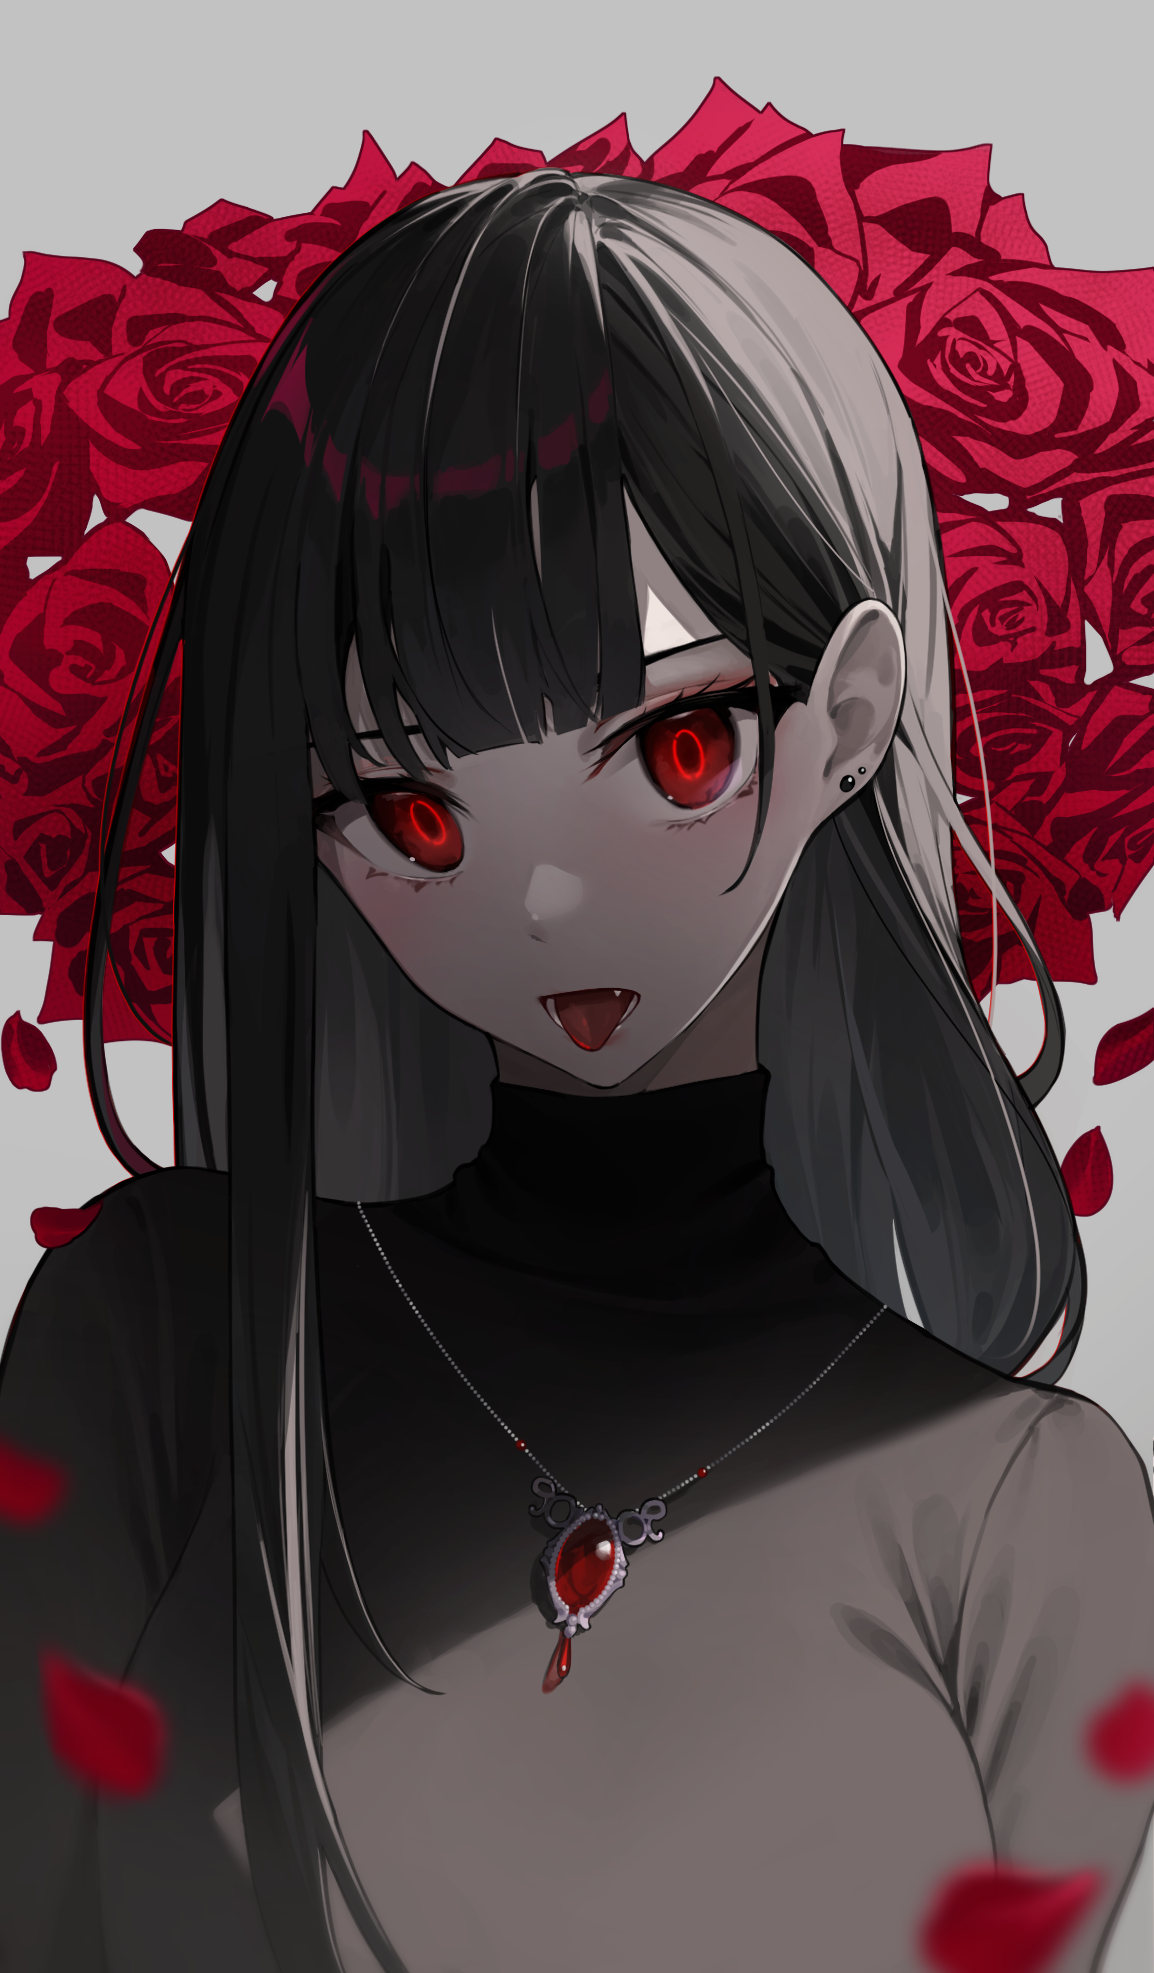 Anime Anime Girls Star741 Red Eyes Rose Roses Black Hair Tongue Out 1154x1973